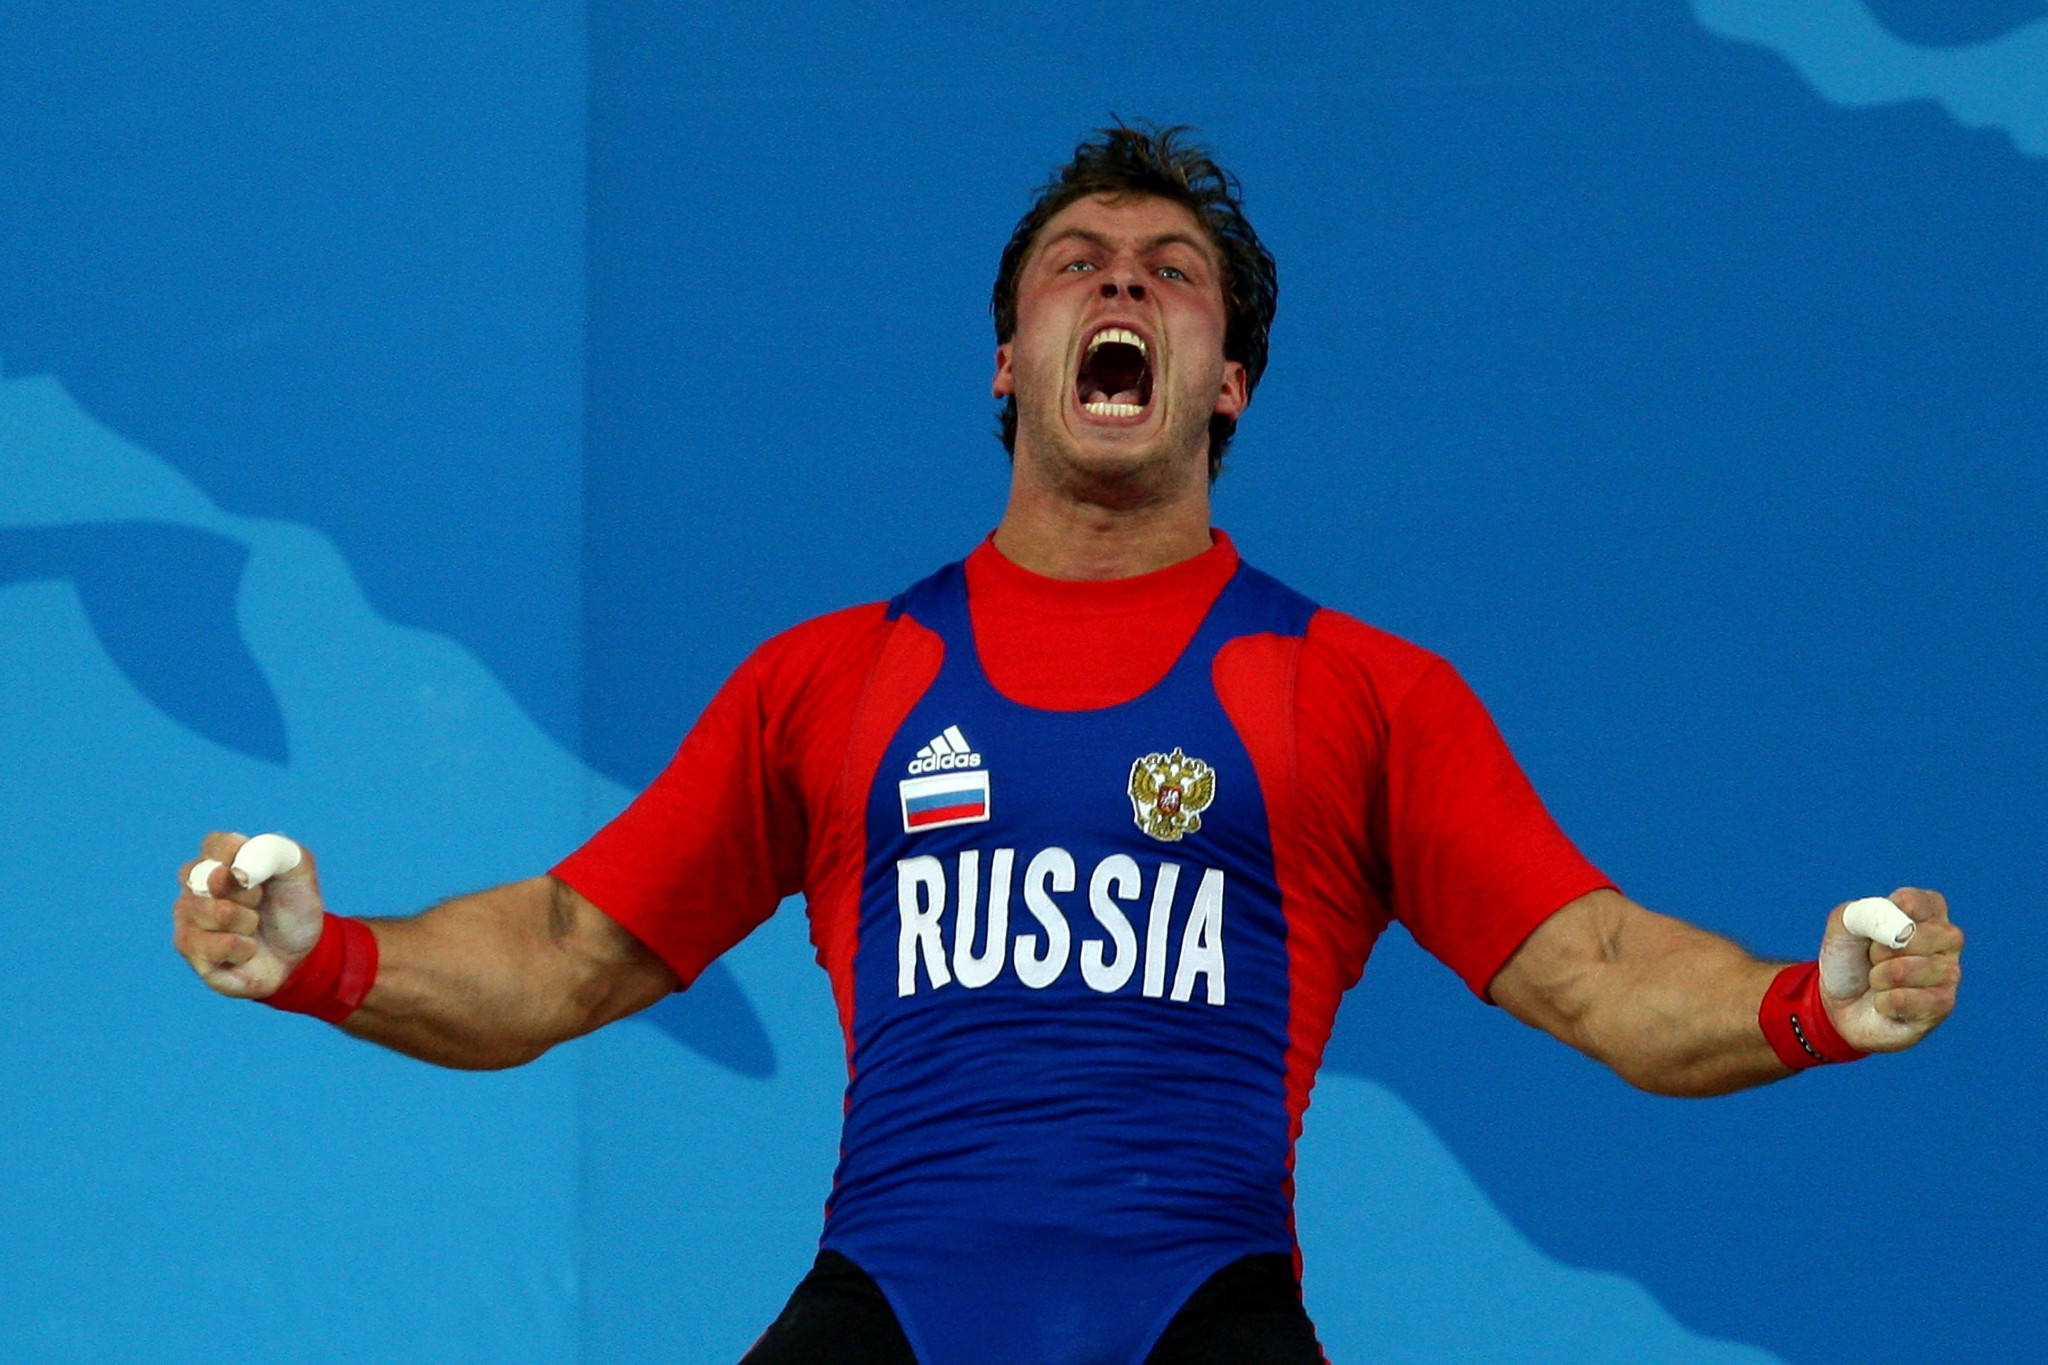 Dmitry Klokov, a world champion in 2005, was unsuccessful in his attempt to unseat Maxim Agapitov ©Getty Images